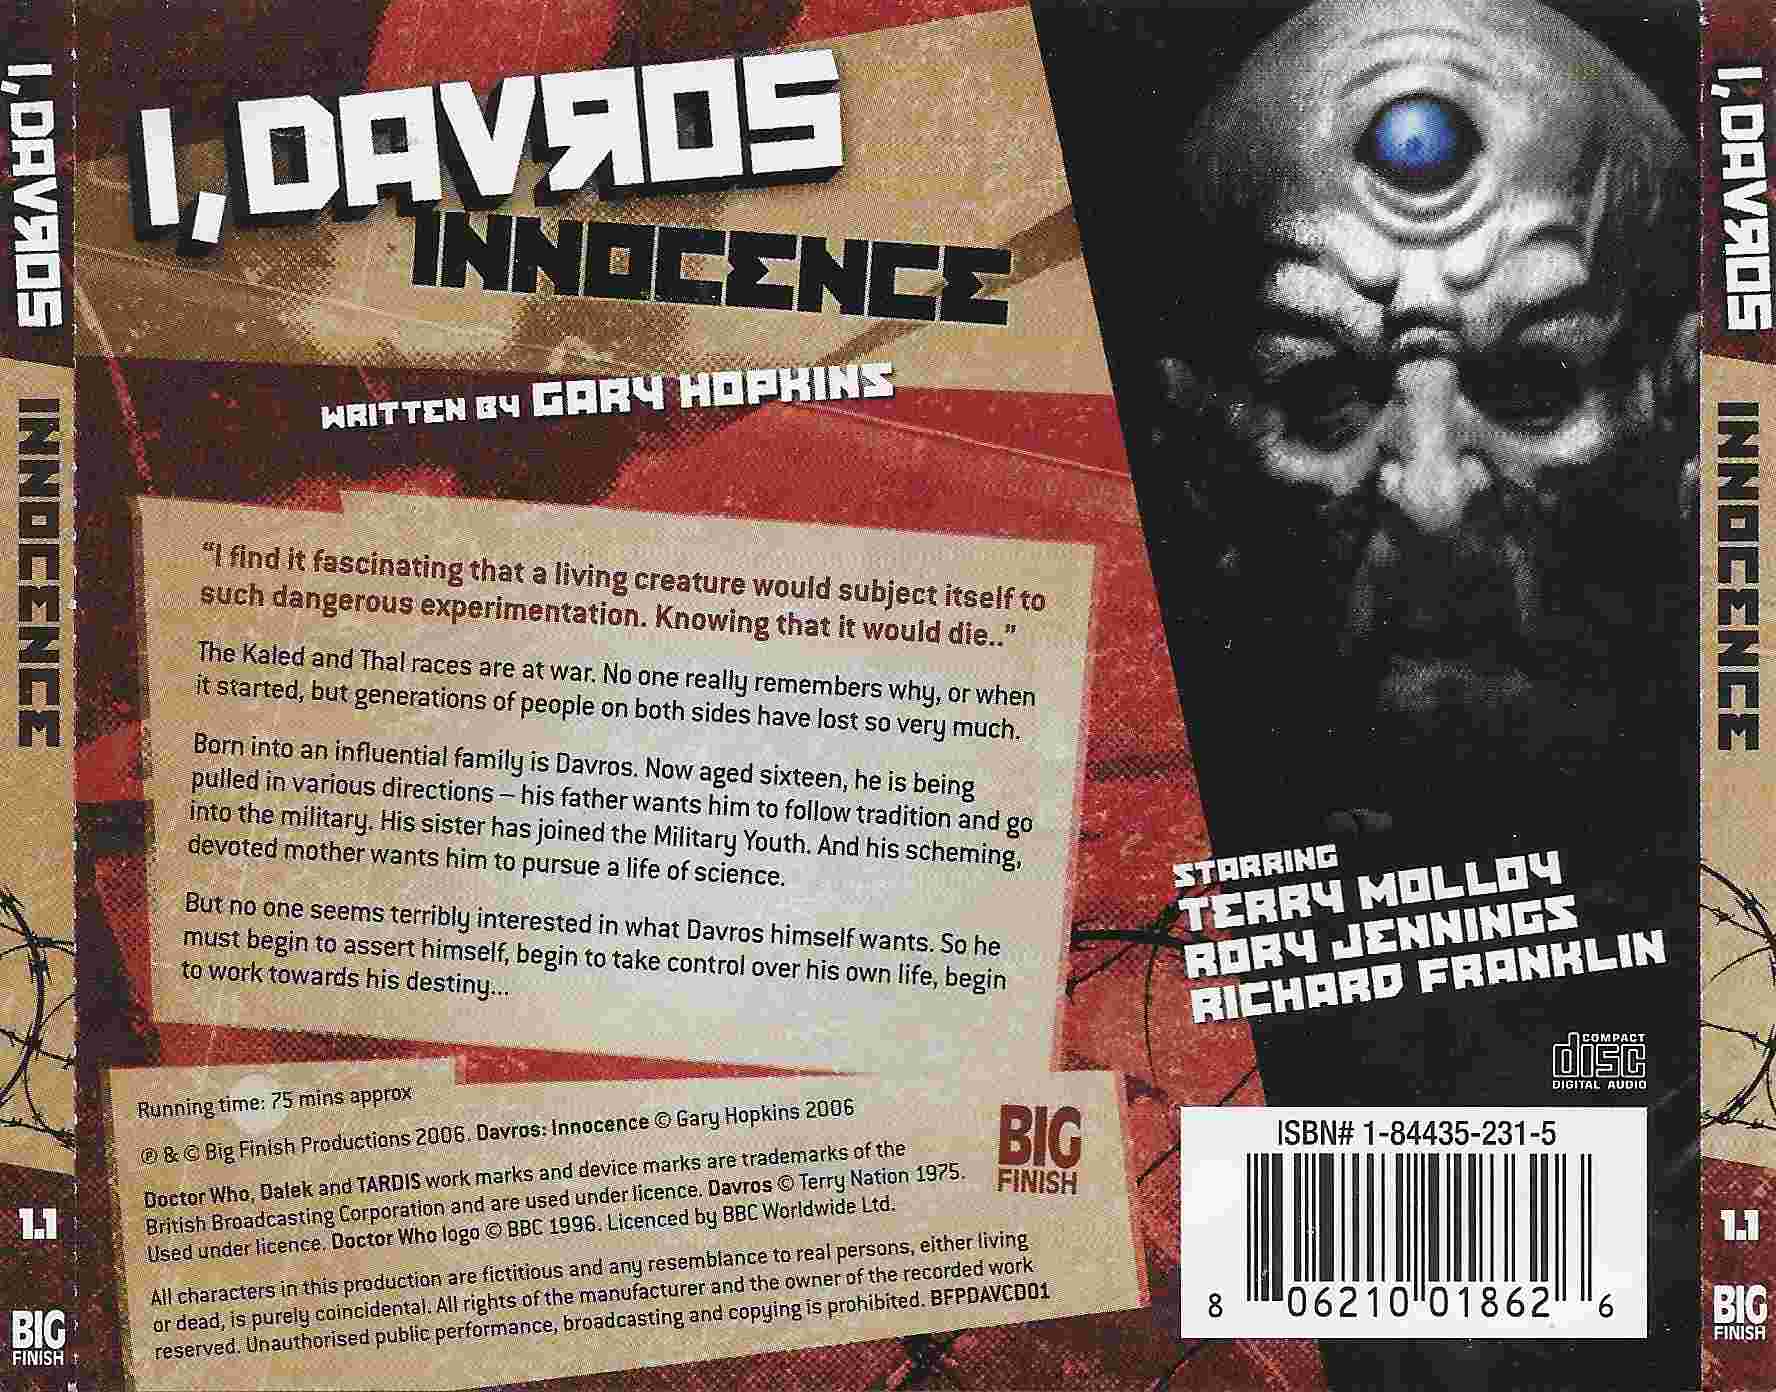 Picture of BFPDAVCD 01 Doctor Who - I, Davros innocence by artist Gary Hopkins from the BBC records and Tapes library